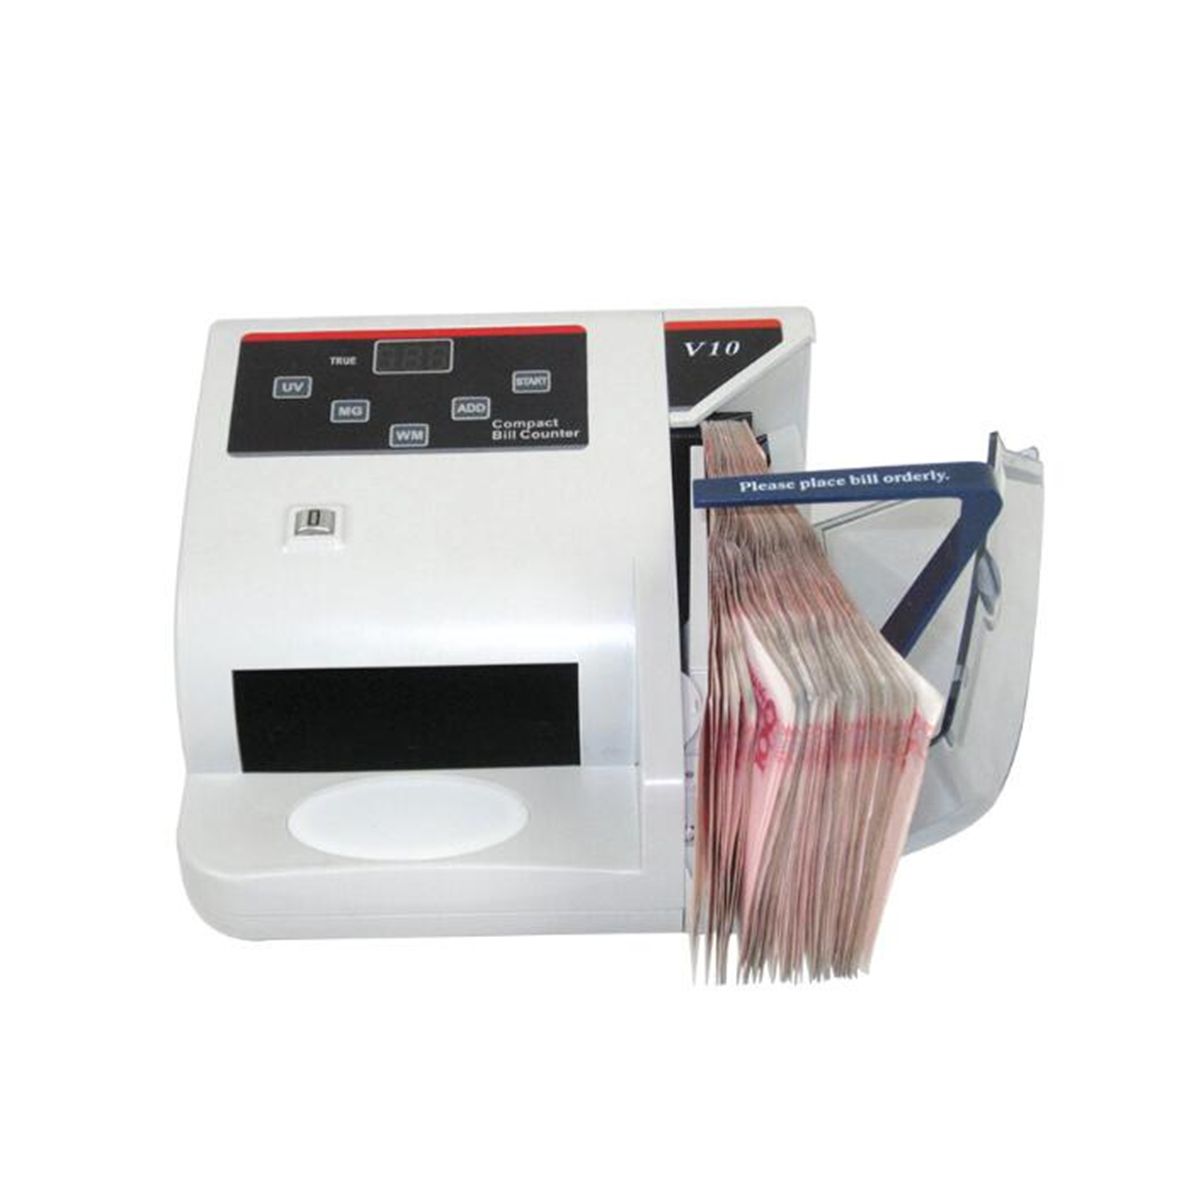 Portable-Money-Bill-Cash-Counter-Bank-Currency-Counting-Detector-UV-MG-Machine-1363088